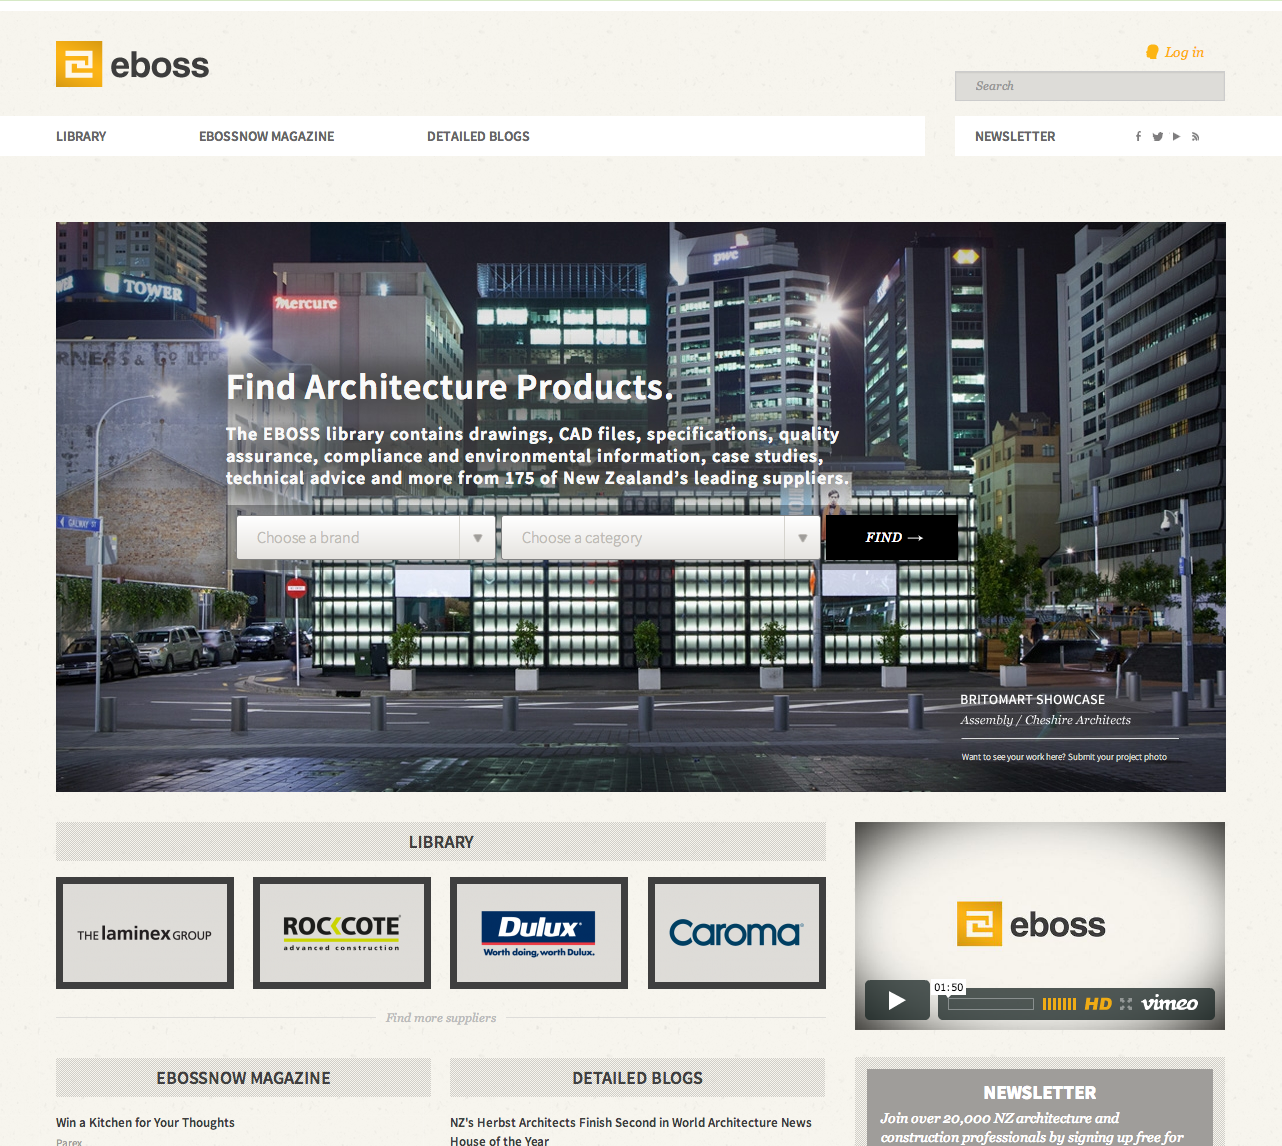 EBOSS - Find Architecture Products. (camfindlay)